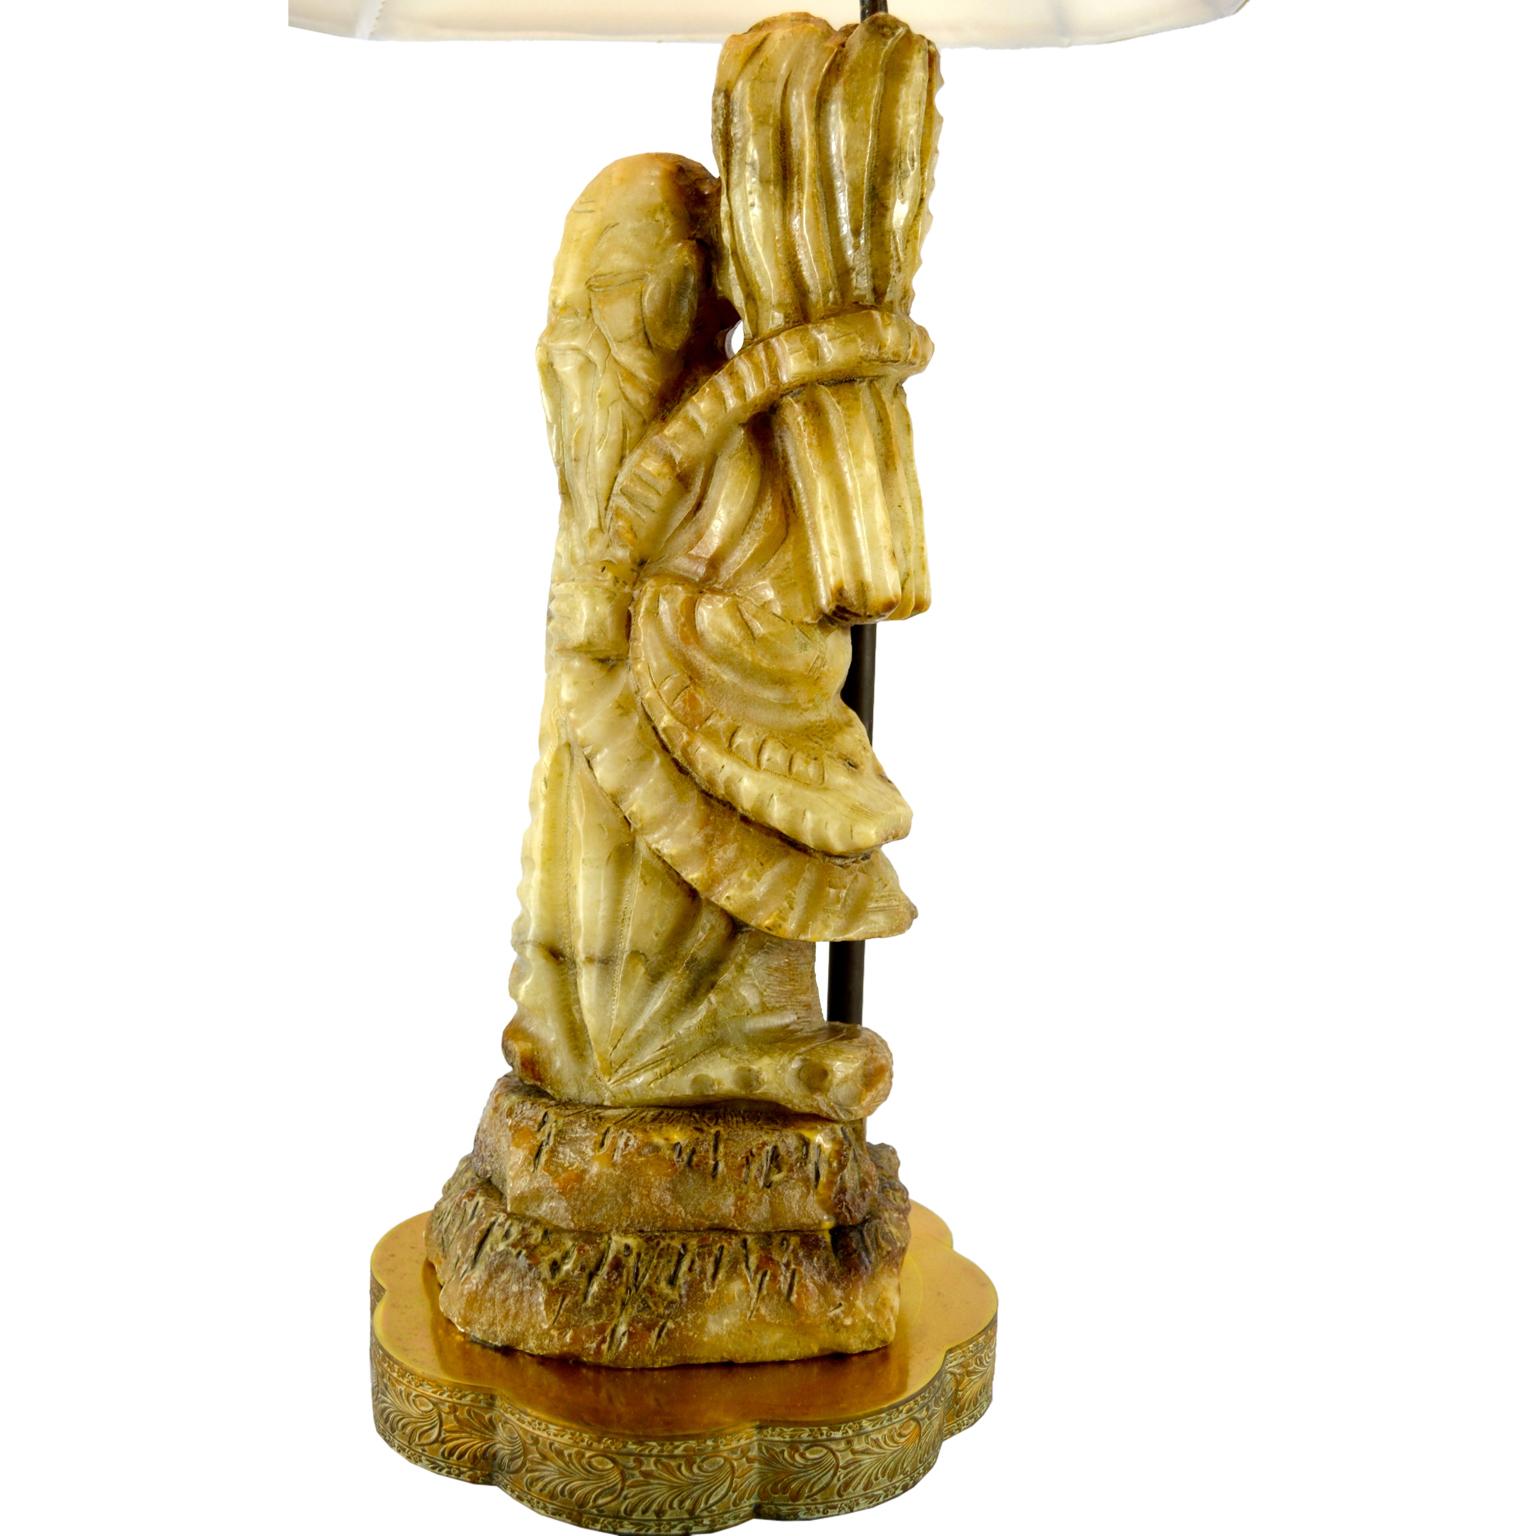 A carved soapstone lamp depicting the Chinese immortal god Shou Xing standing on stone rocks and carrying a wheat sheaf on his back atop two stone ‘rocks’. The figure rests on a later shaped brass base.